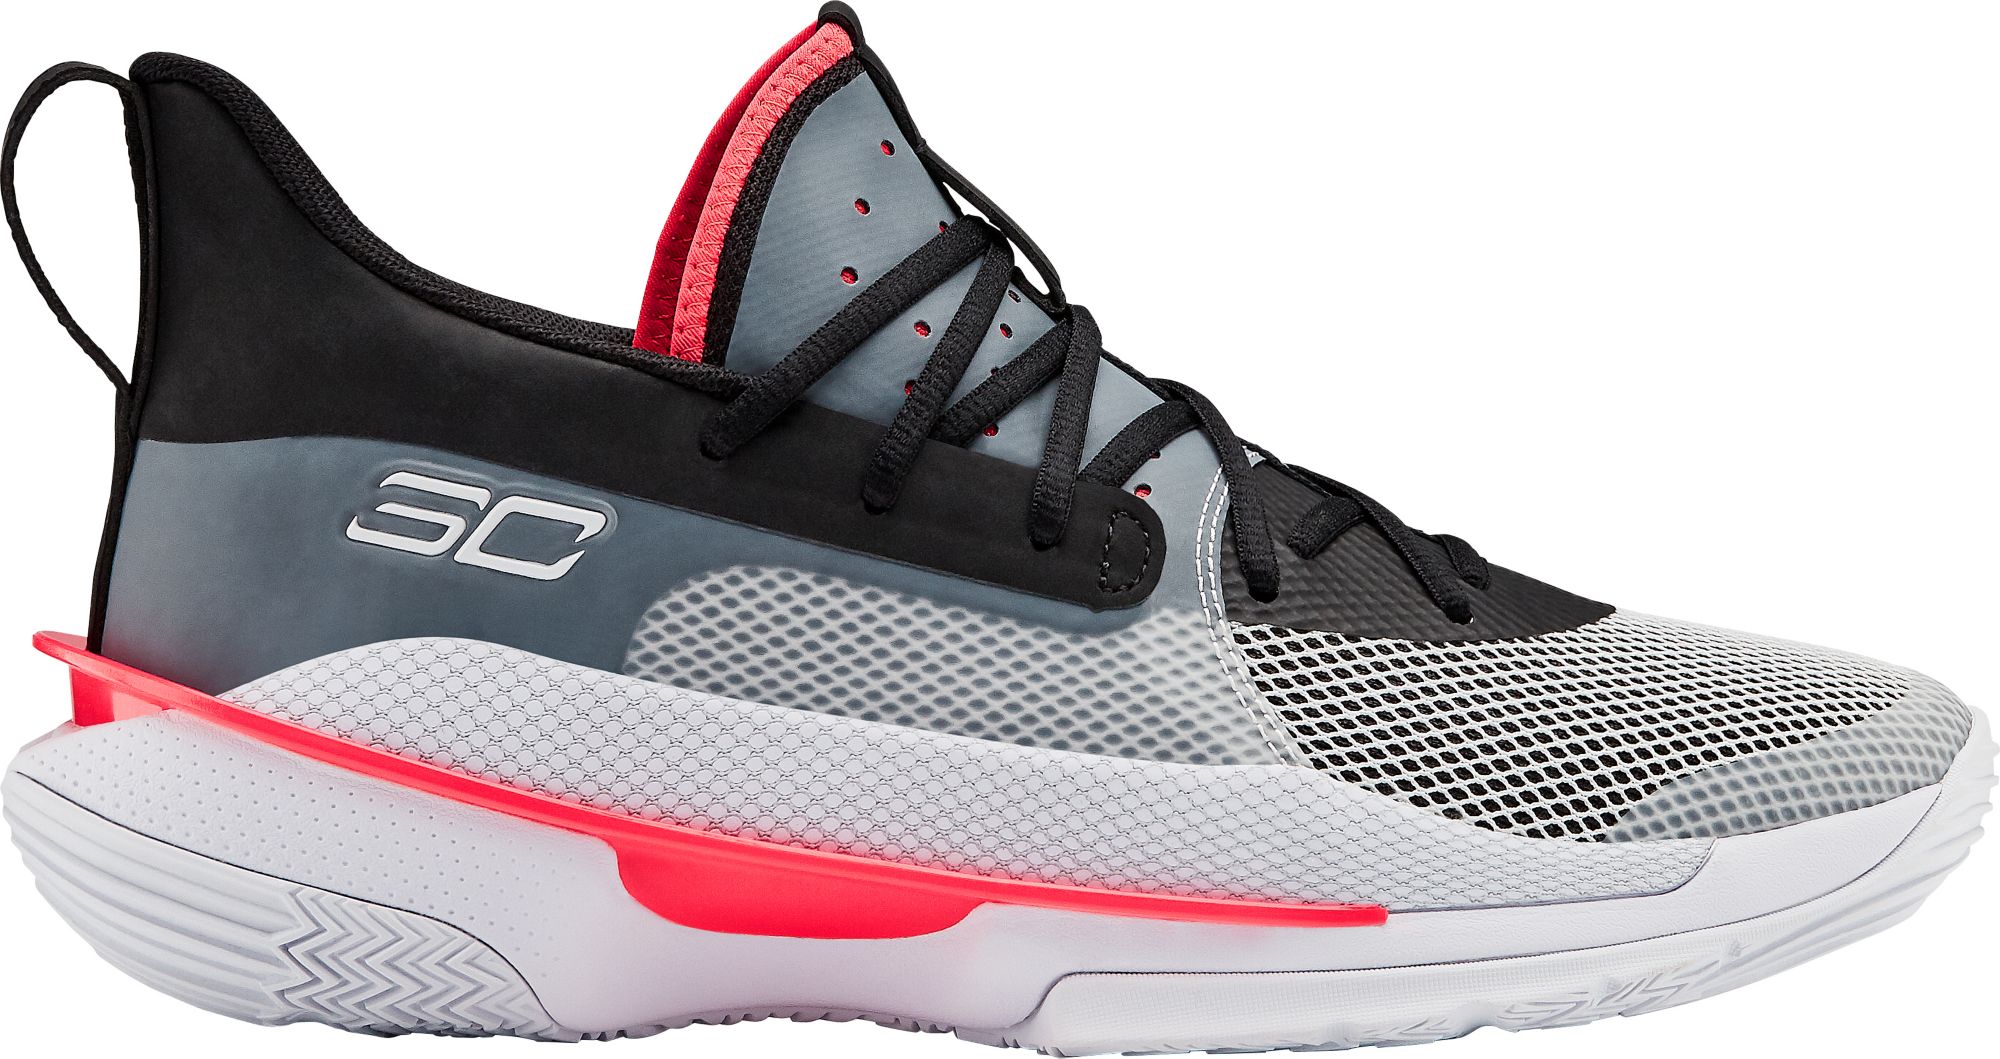 Under Armour Curry 7 Basketball Shoes 